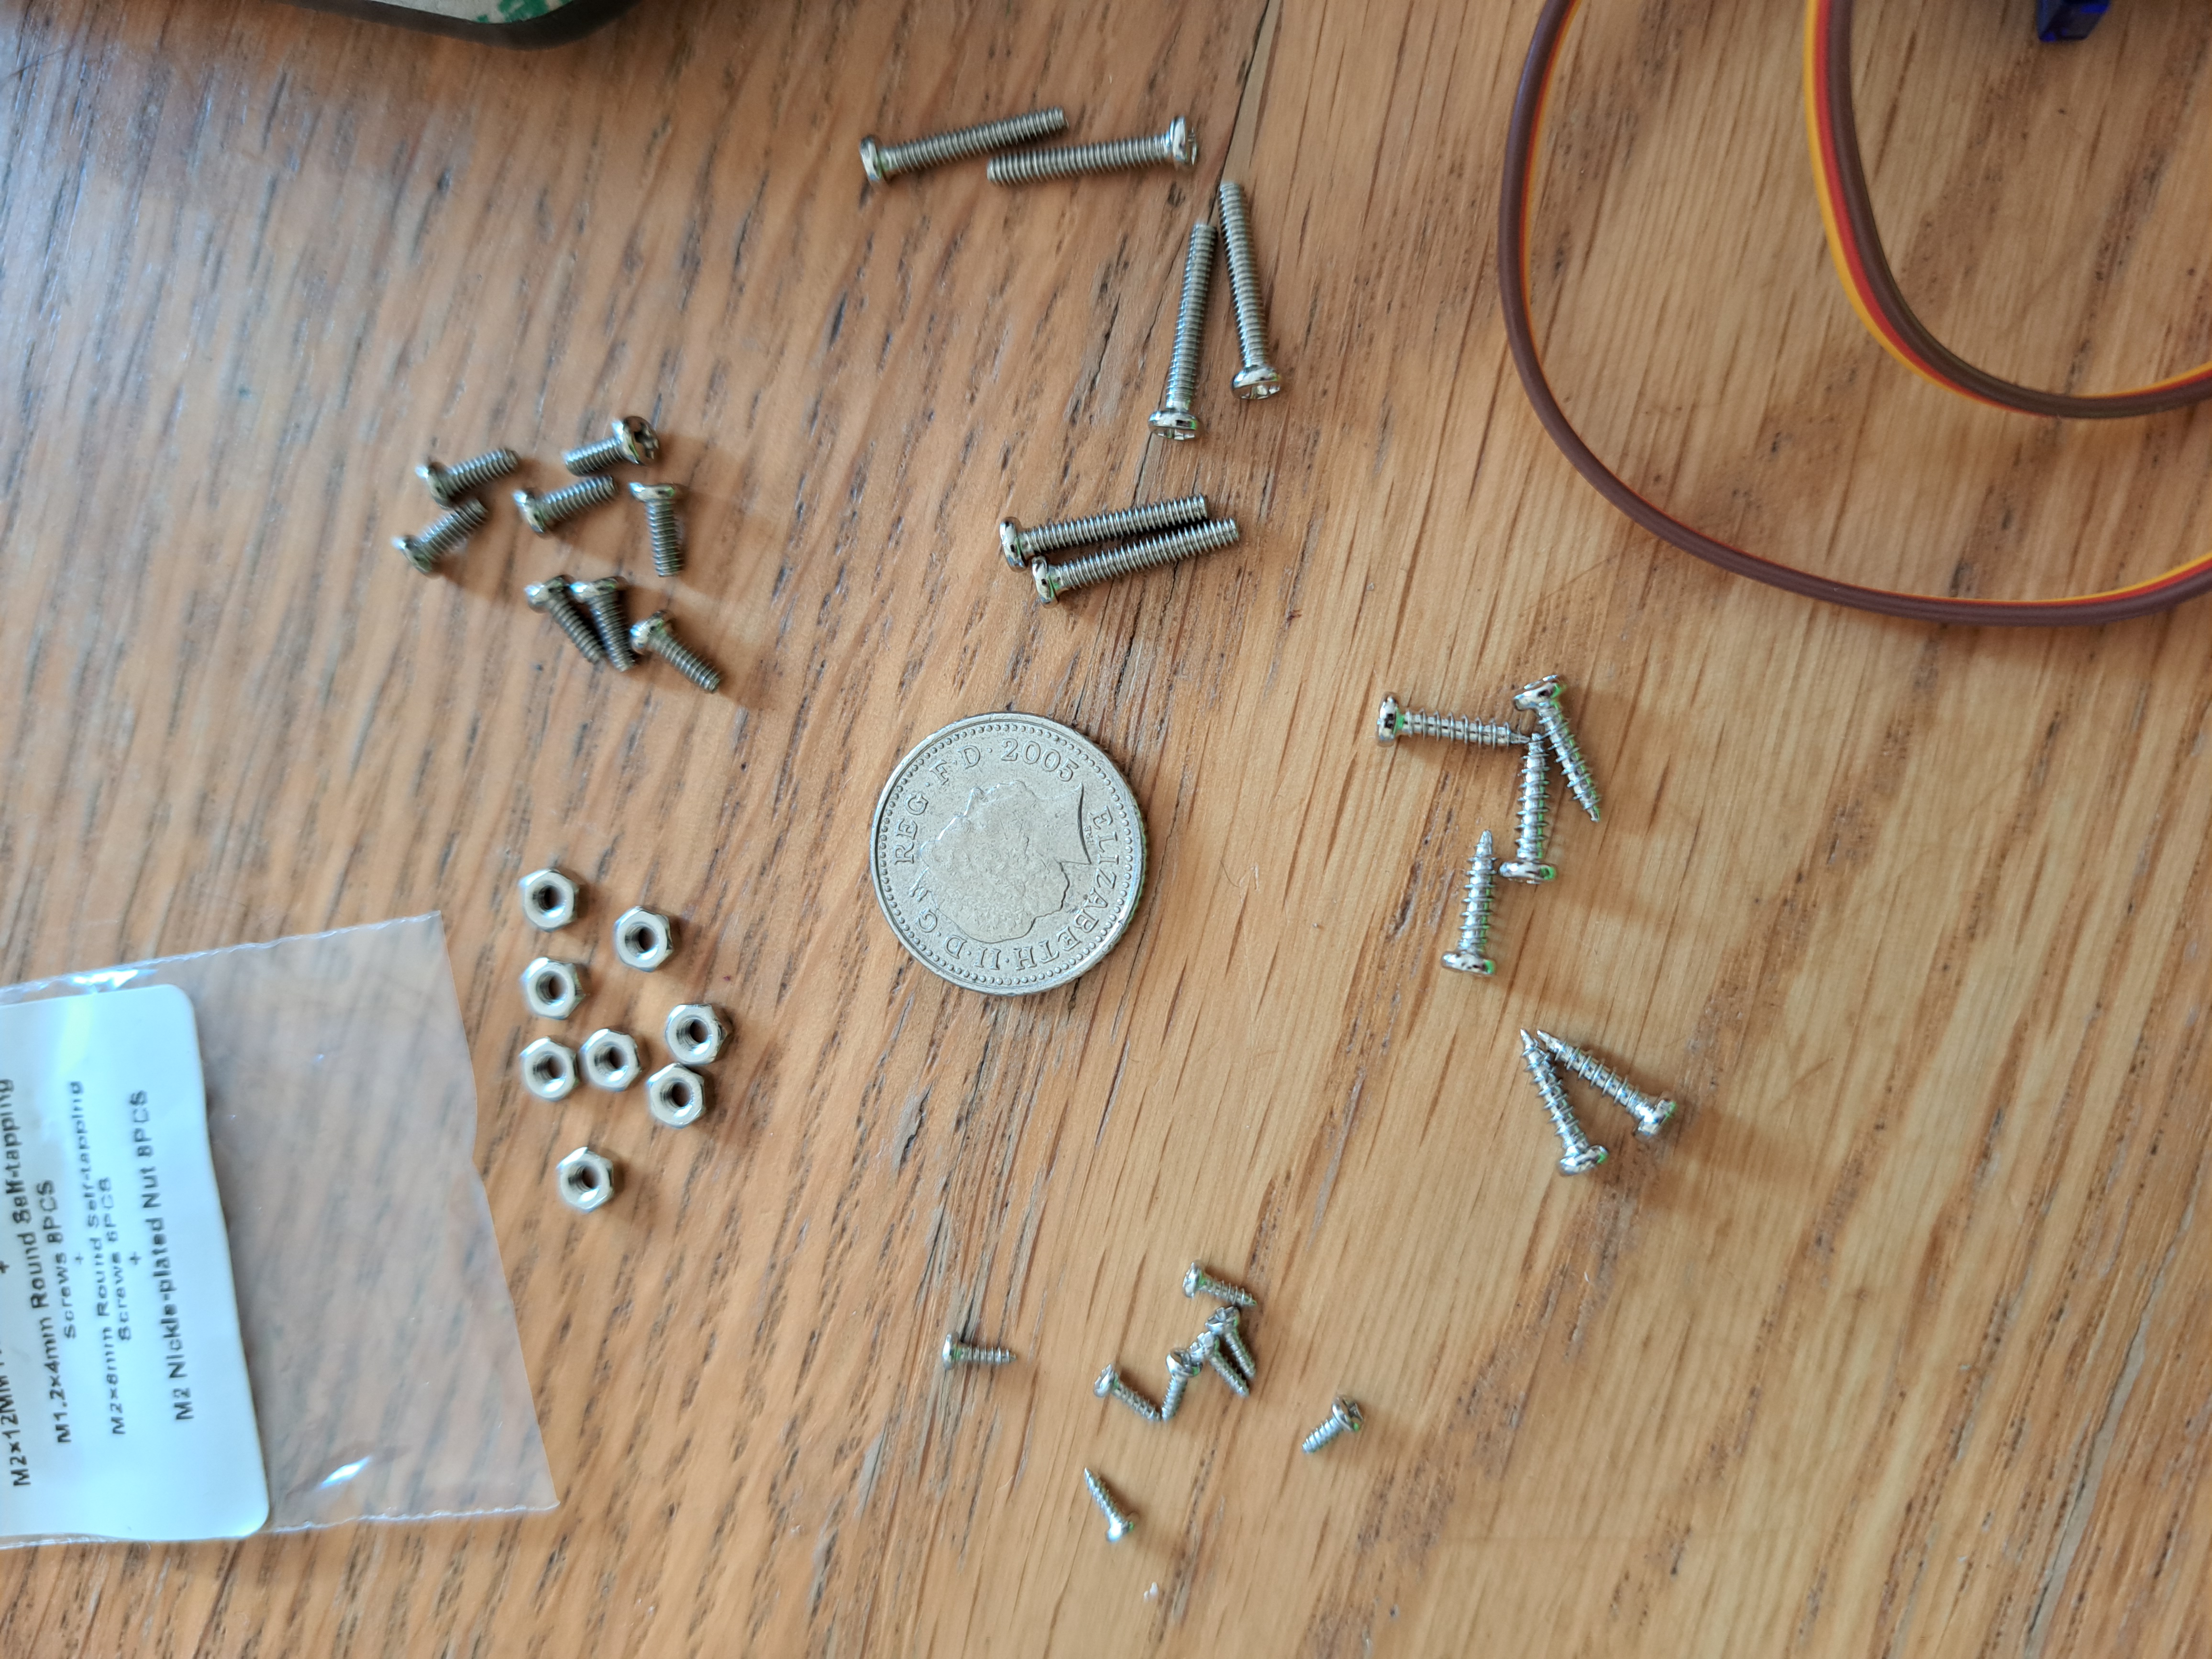 Tiny Screws and Nuts